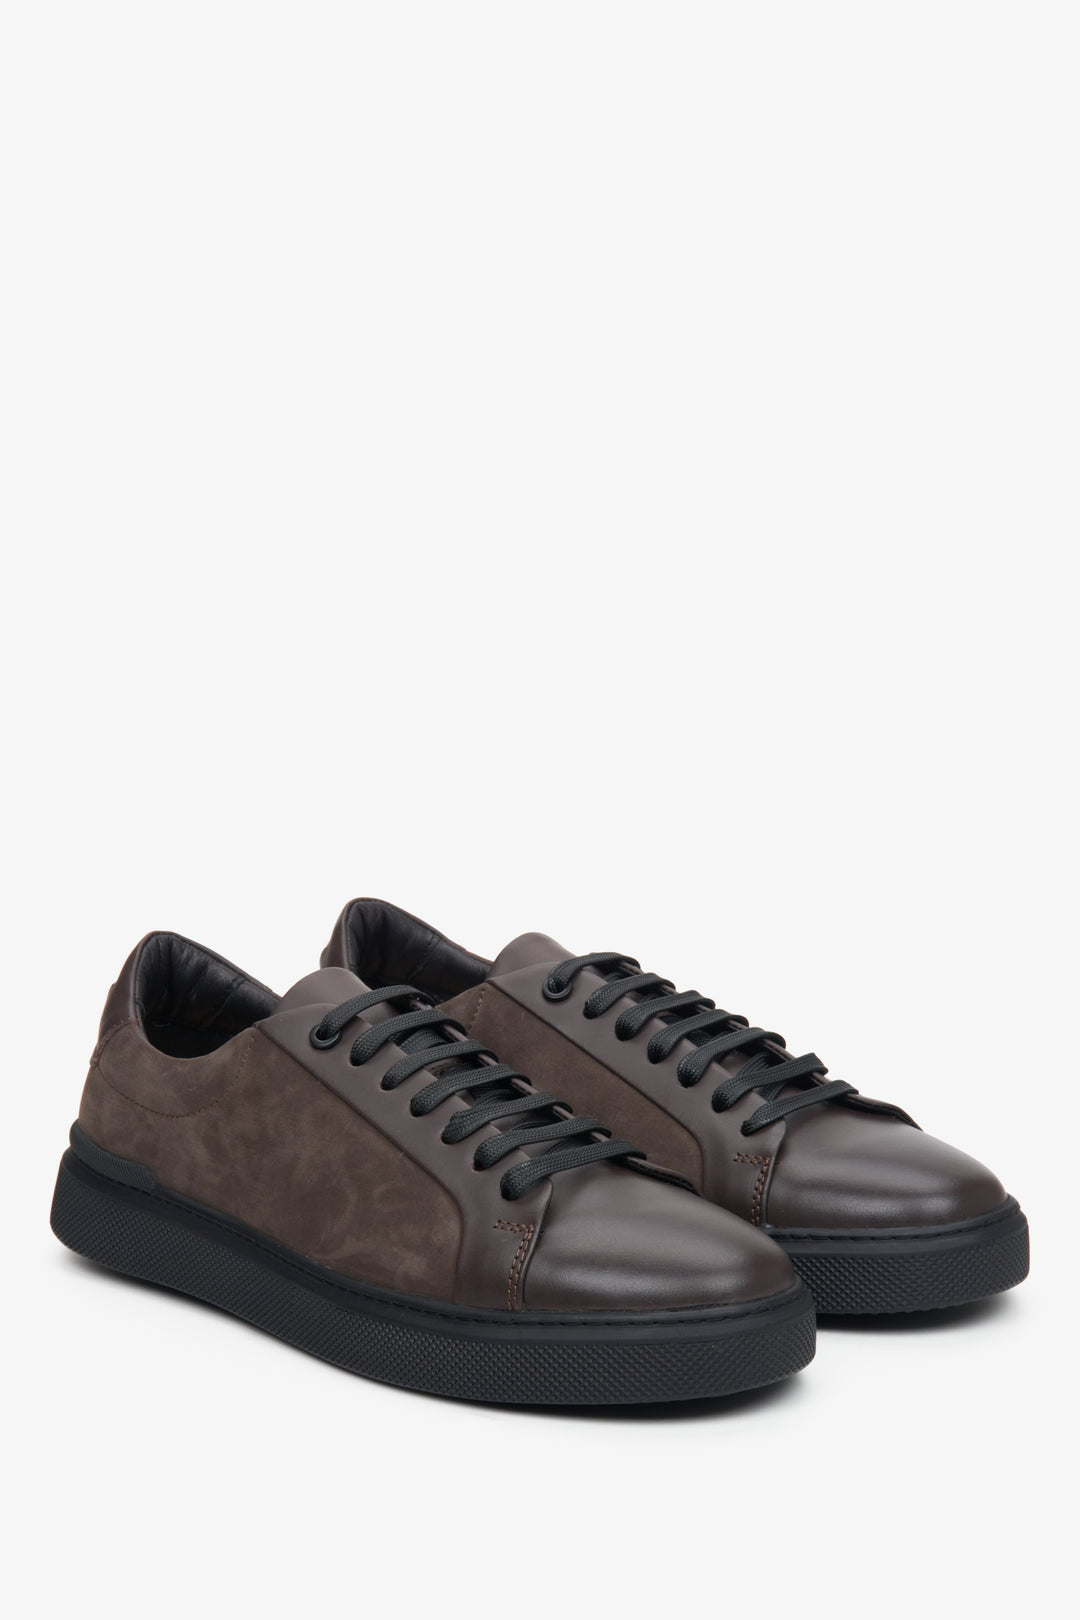 Brown men's sneakers made of velvet and genuine leather by Estro.